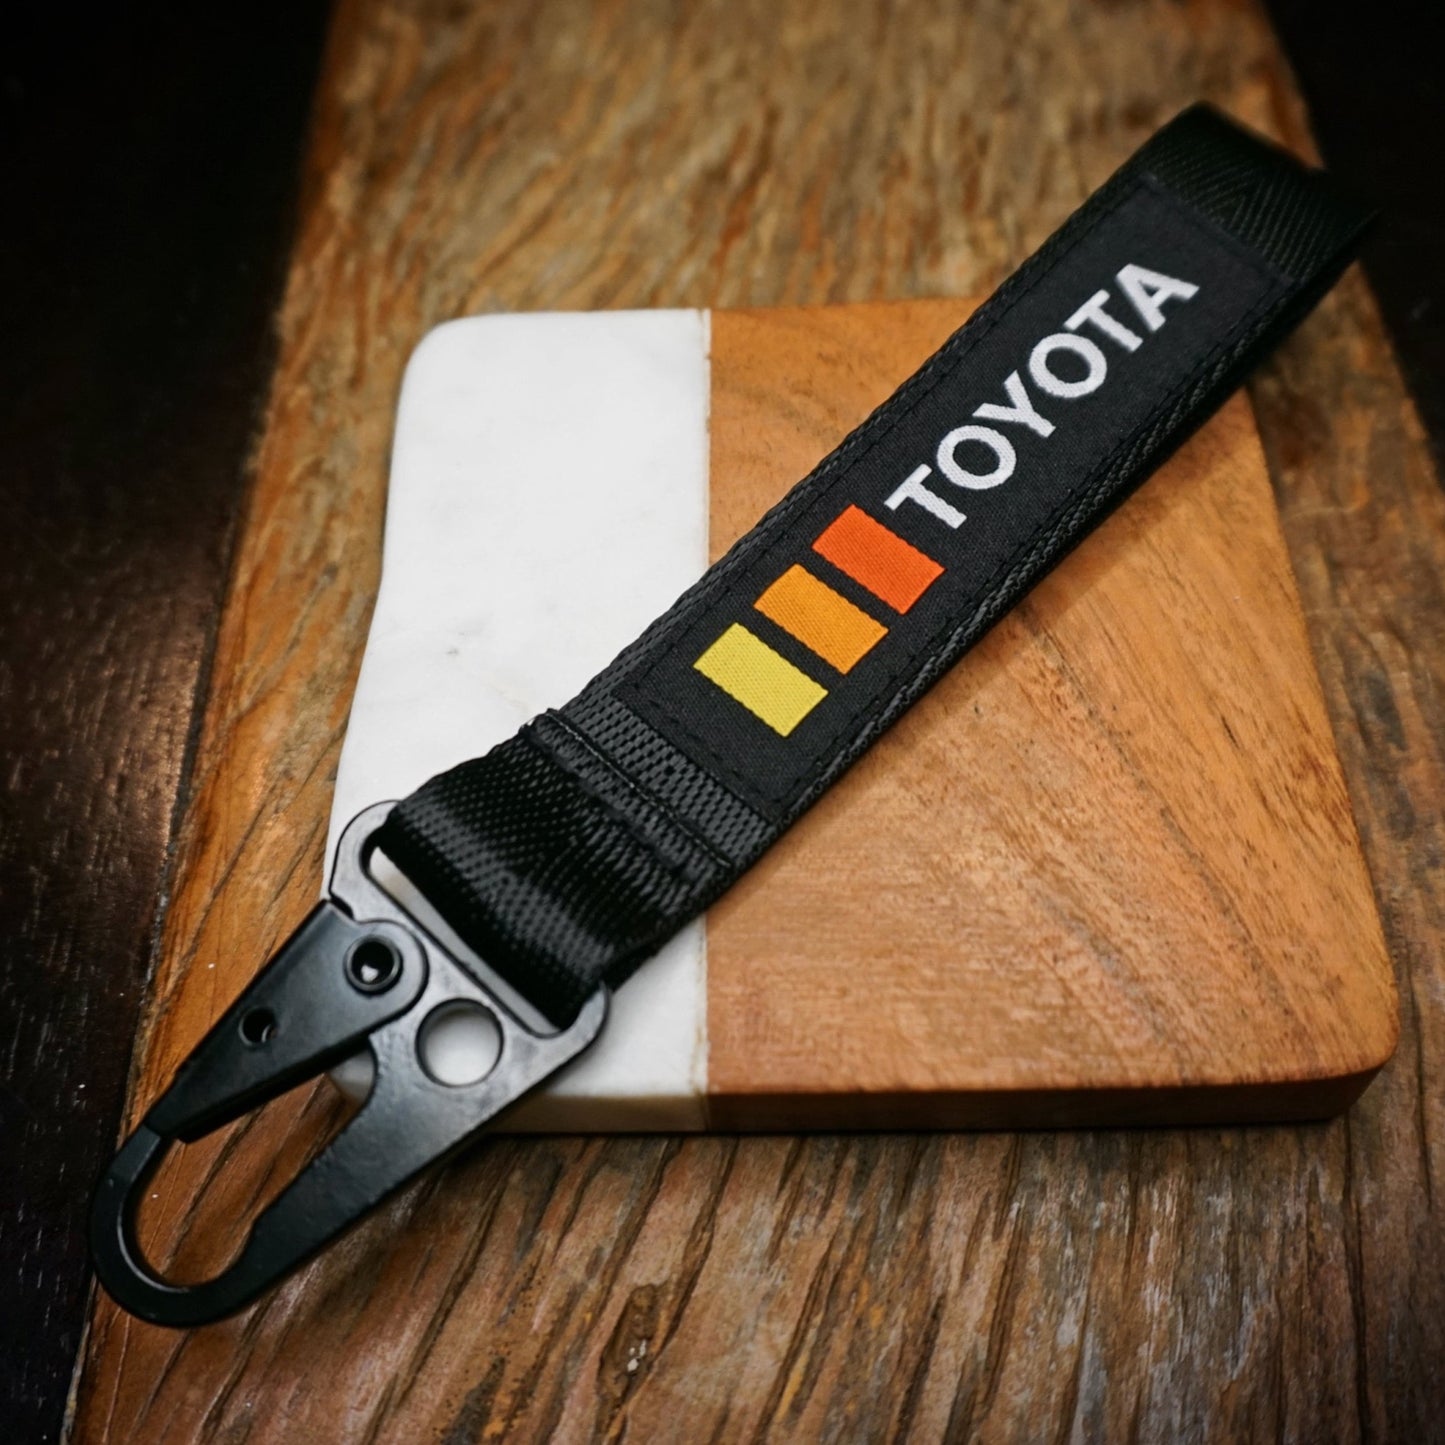 TRD Retro Stripes Keychain for Toyota, Metal Clip-On Accessory